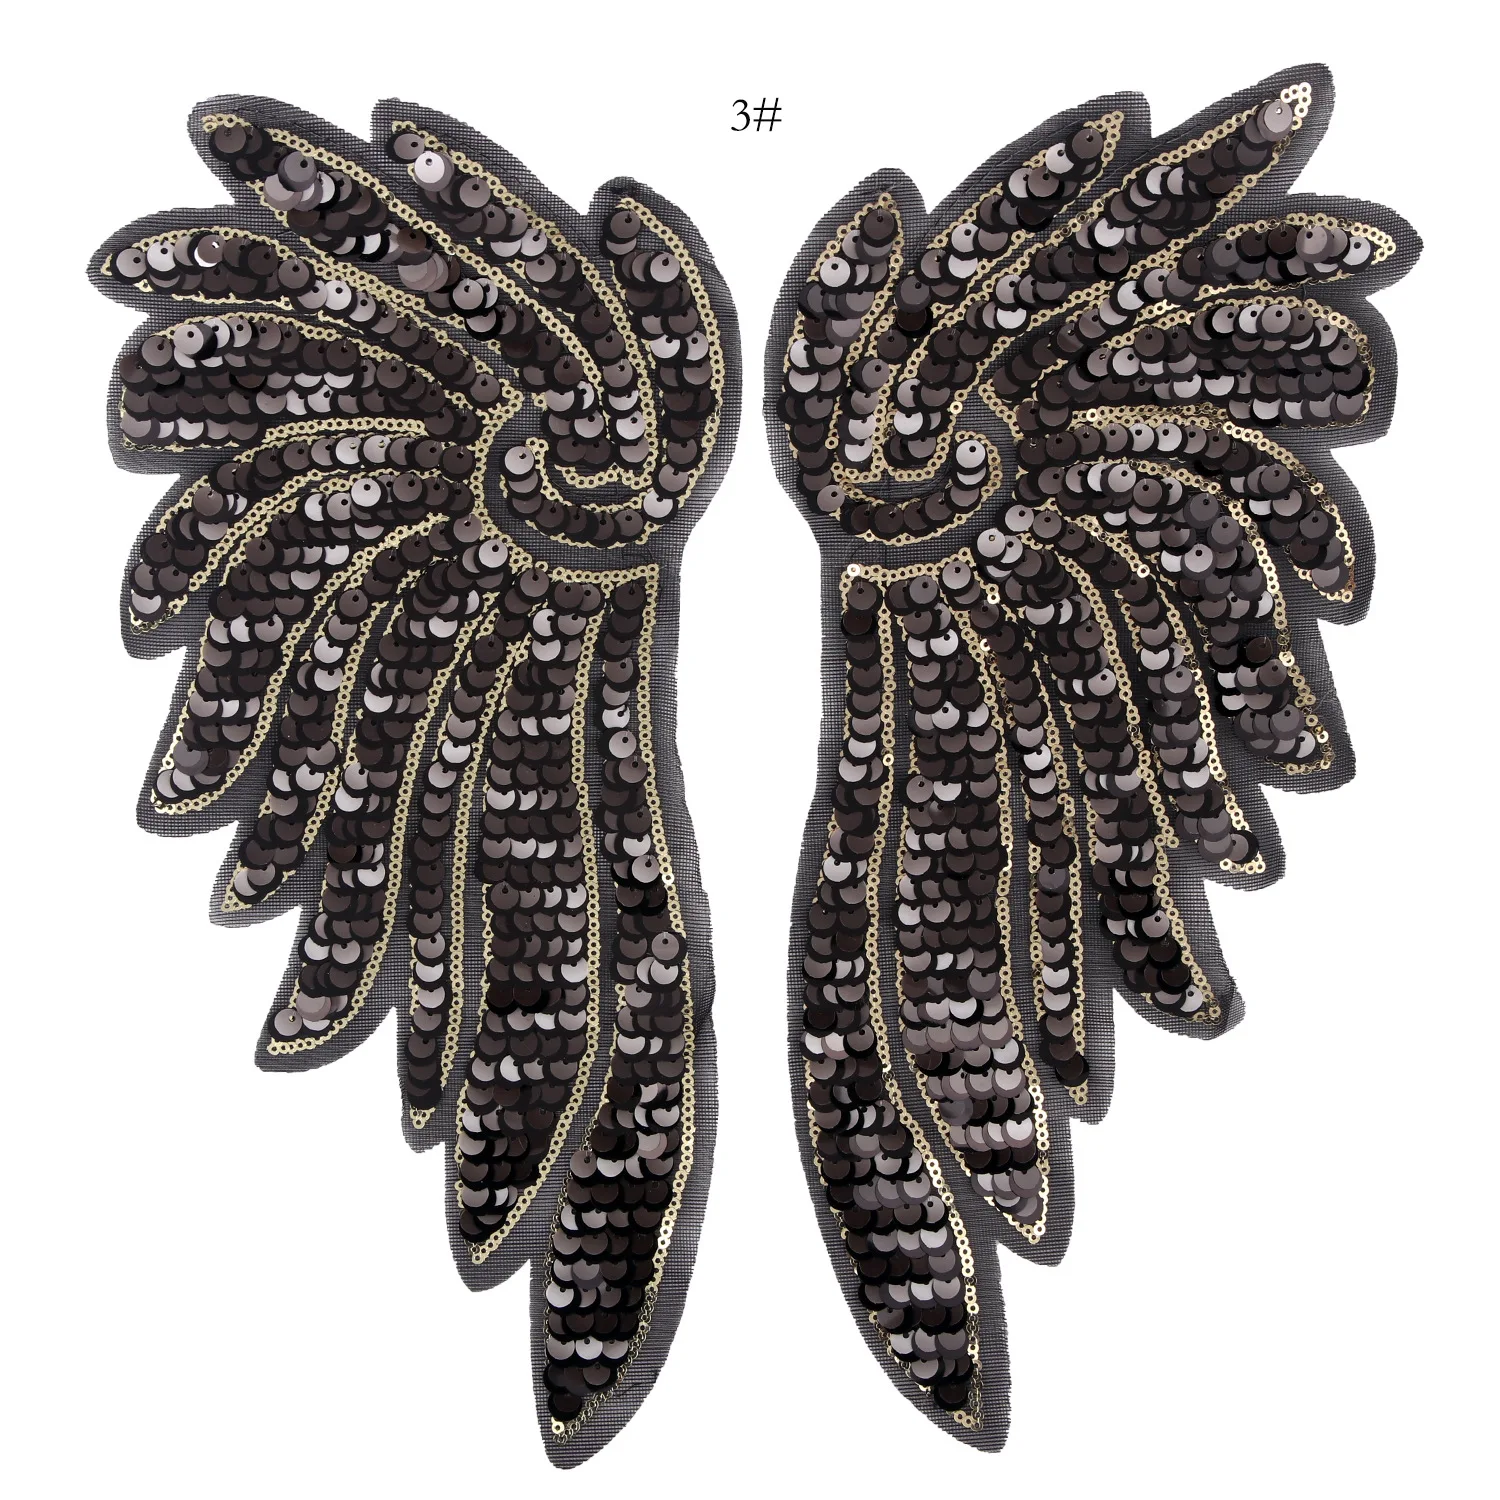 Gugutree Big Angel Wings Patches,Embroidery Angel Wings Applique For ...